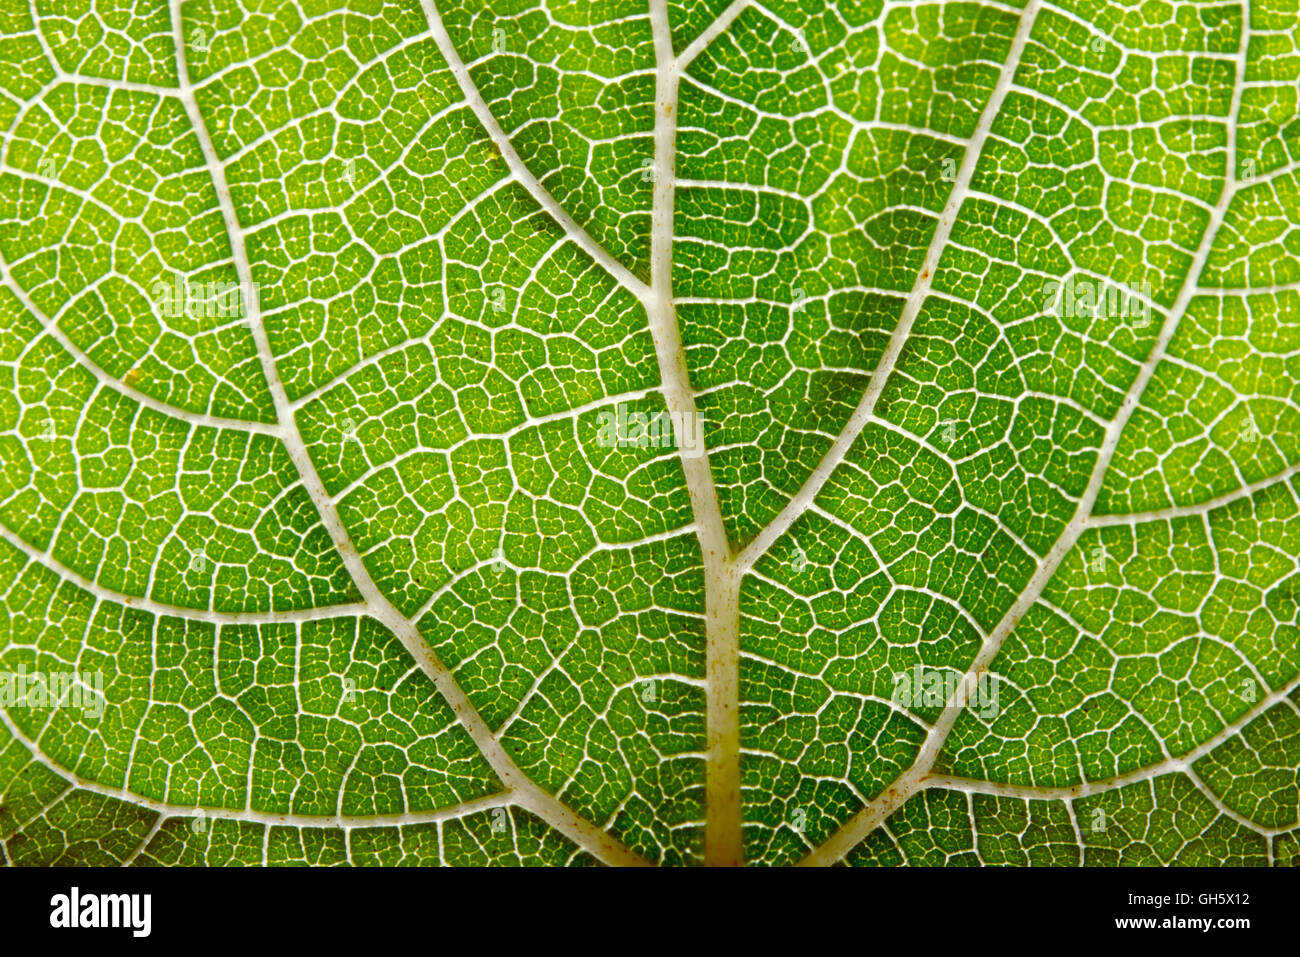 Leaf abstract background texture with veins Stock Photo